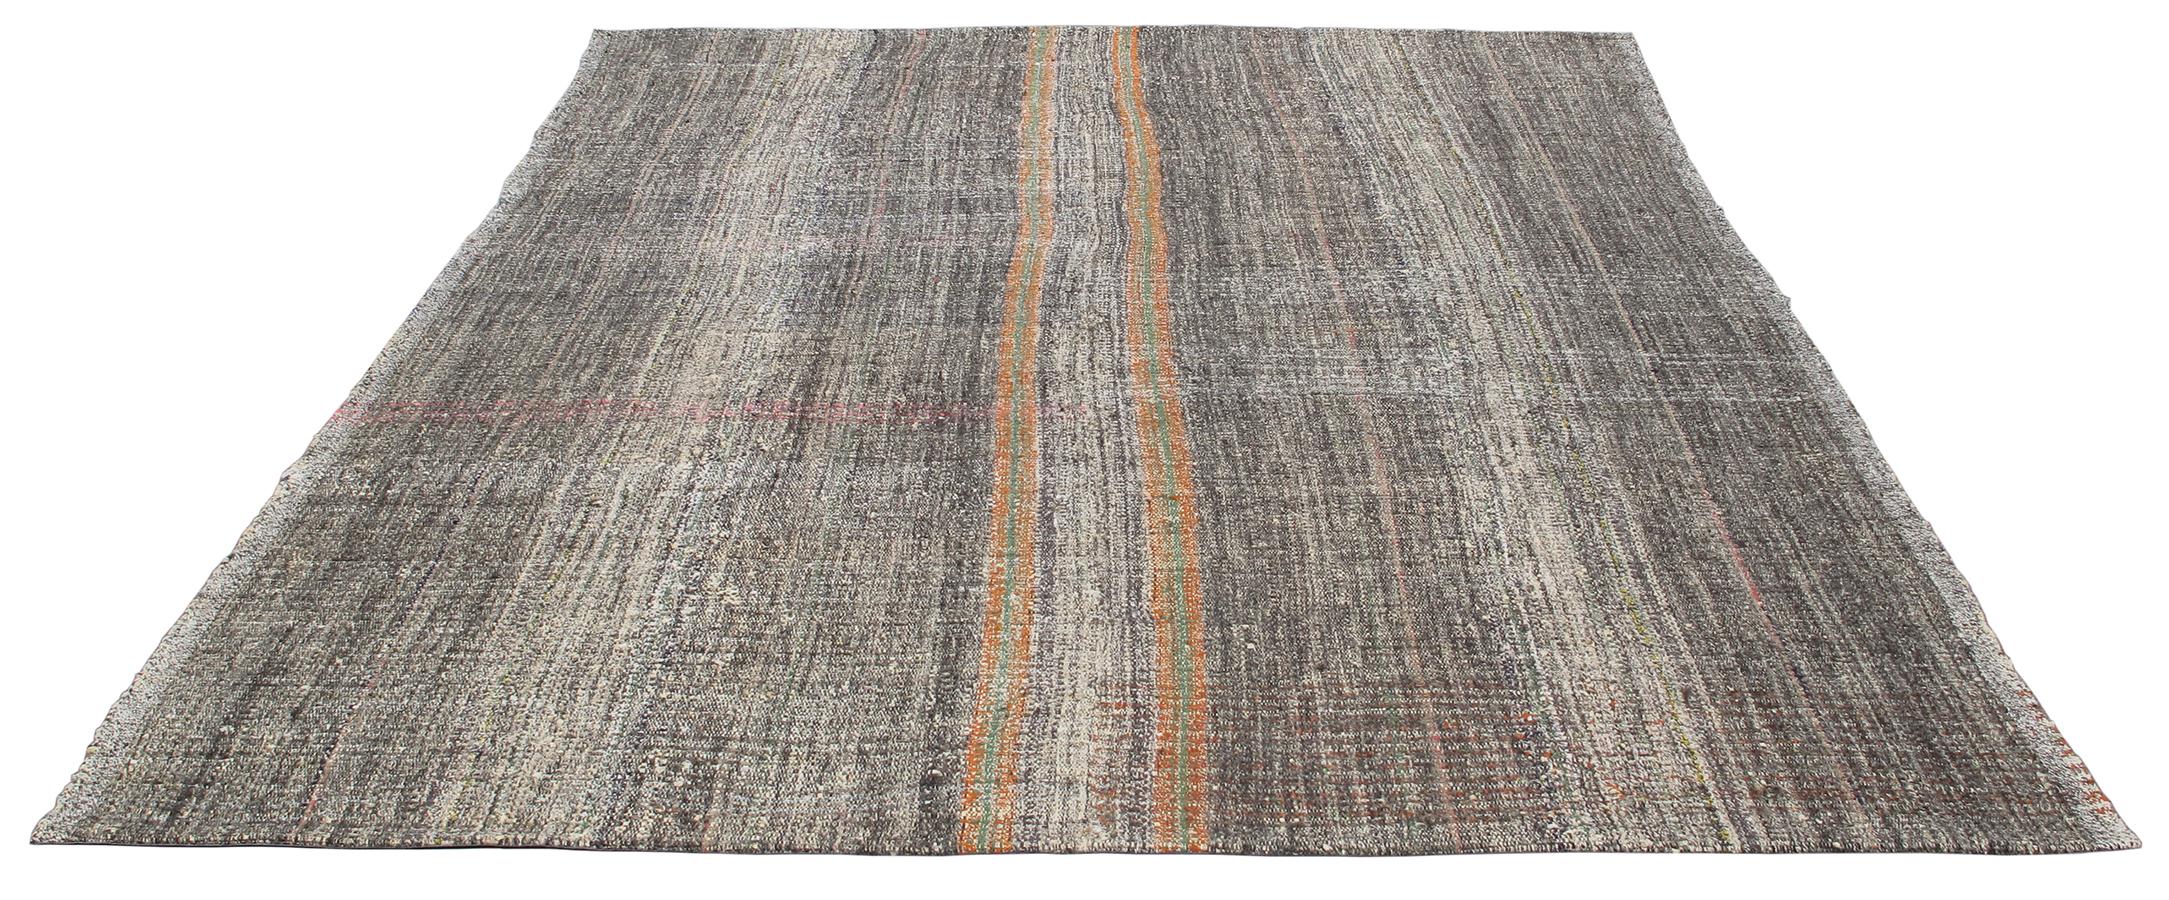 Vintage Mid-Century Modern Minimalist Persian Flat-Weave Rug In Excellent Condition For Sale In New York, NY